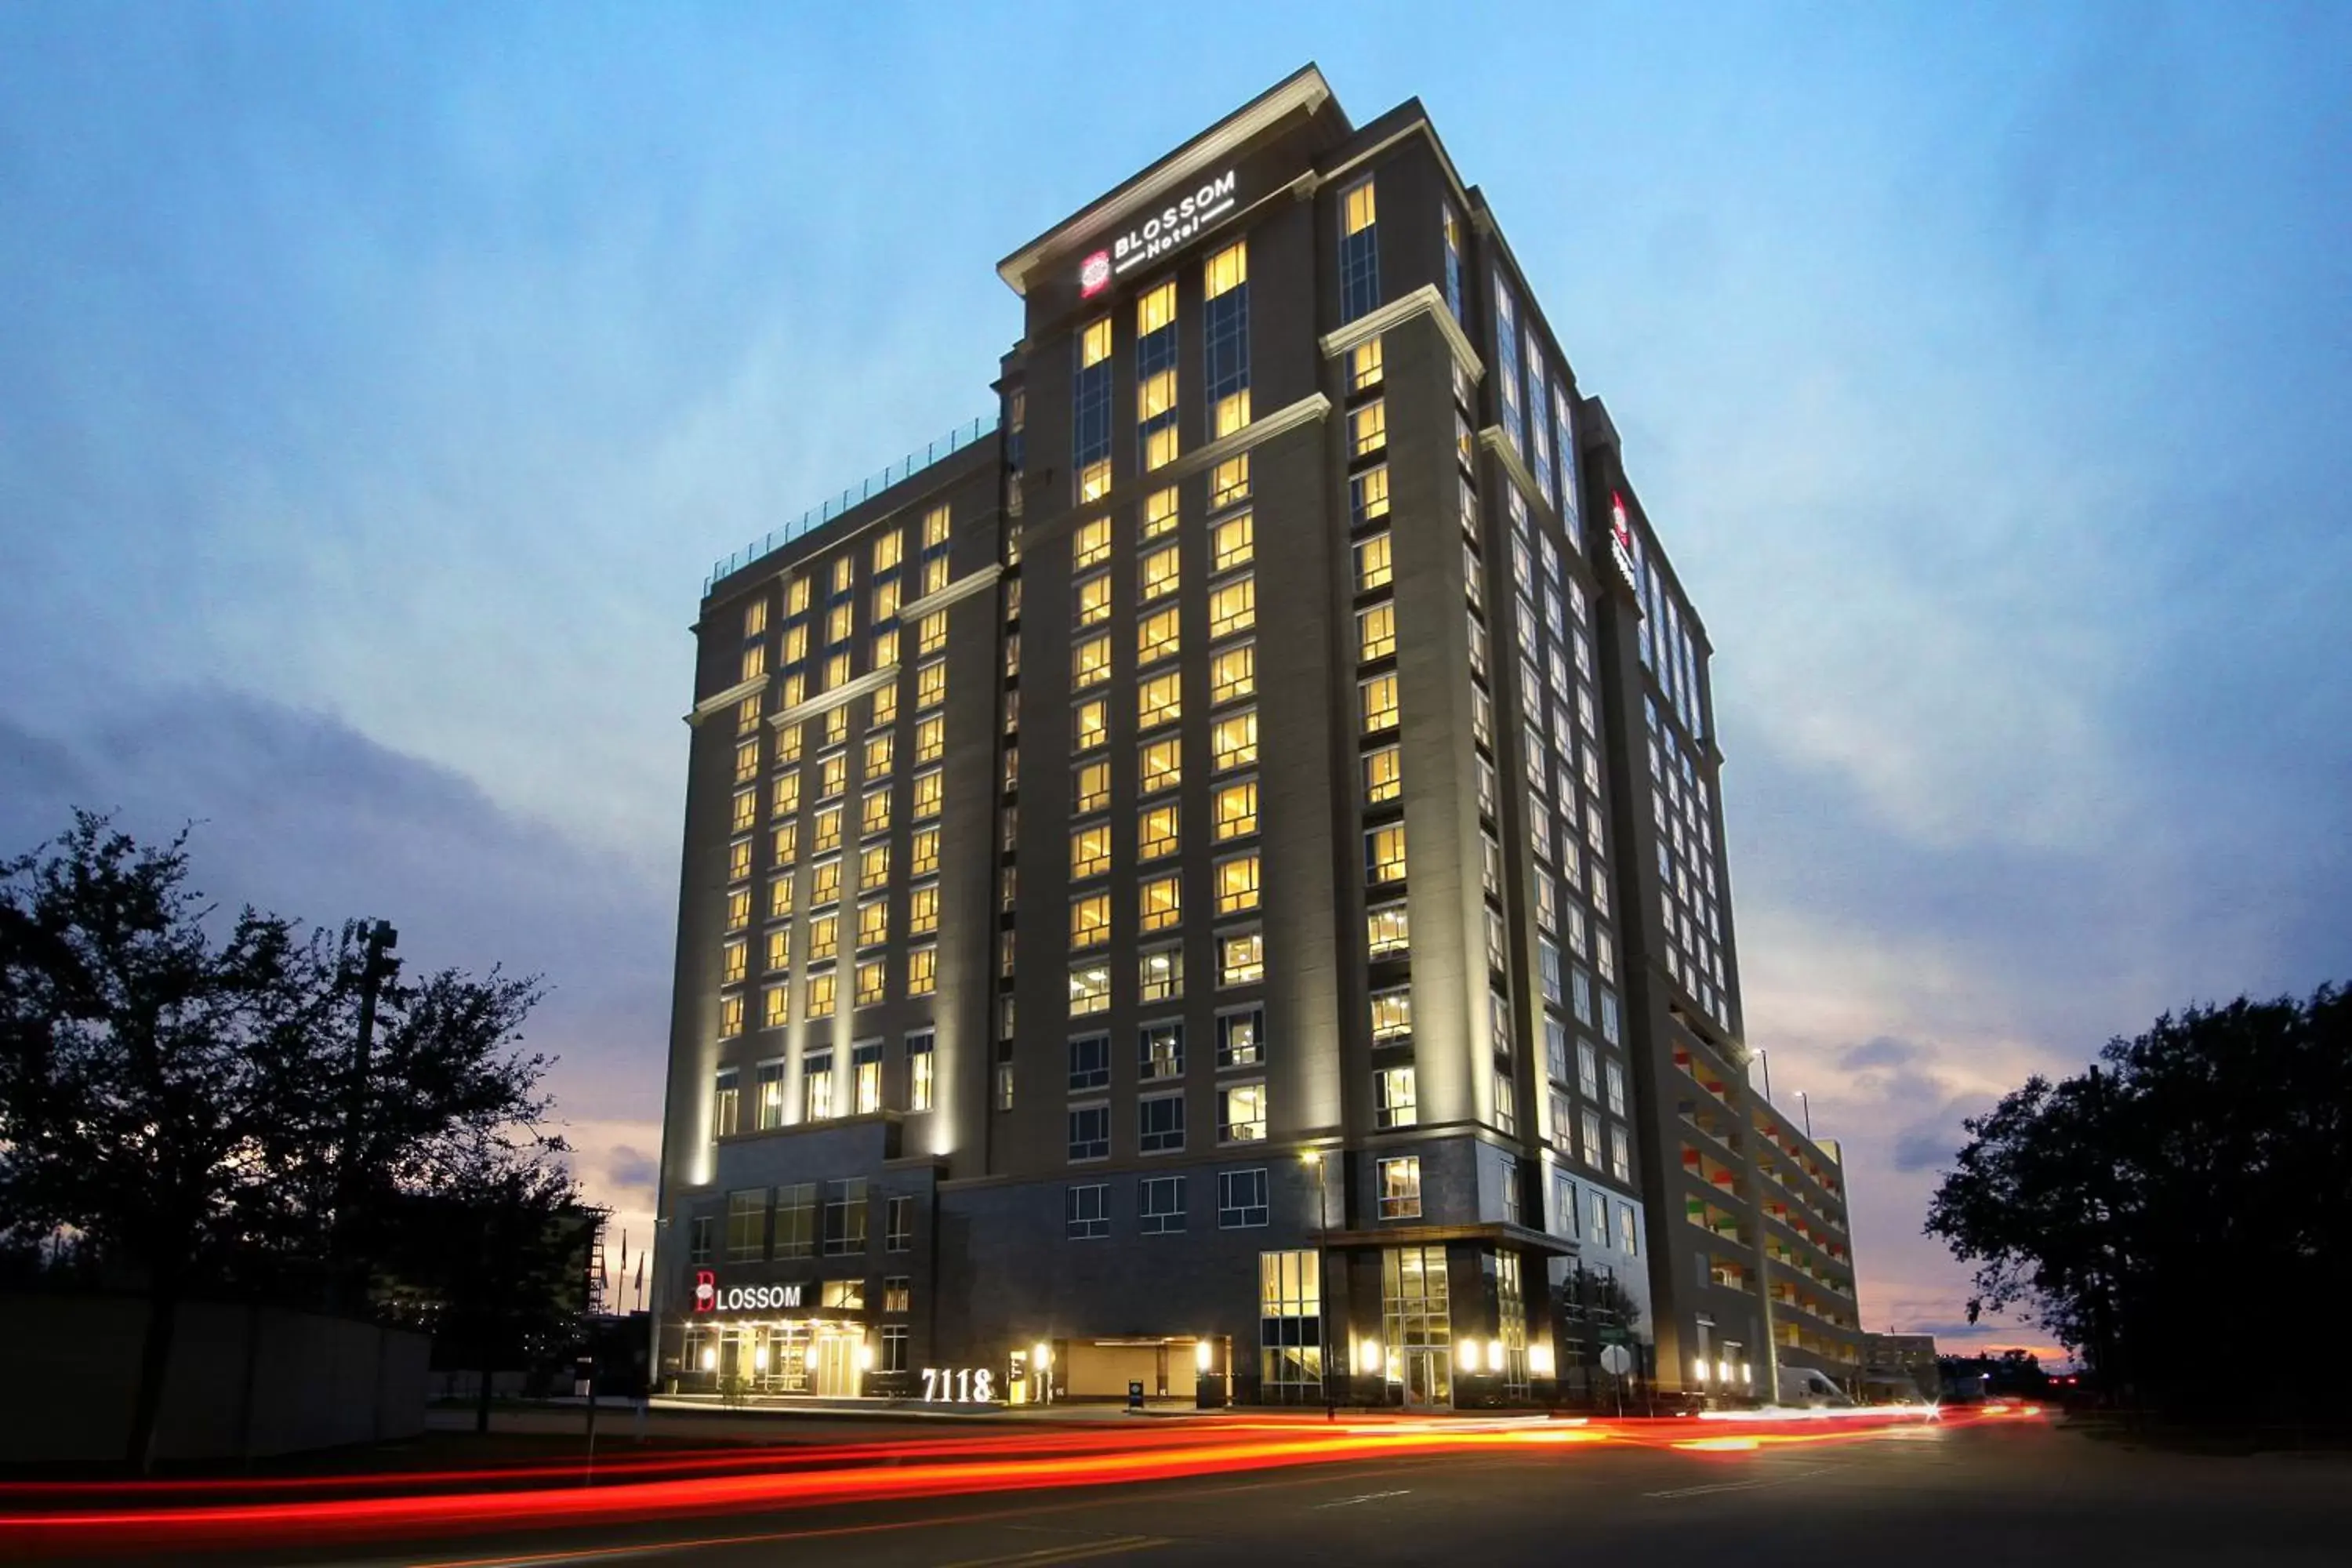 Property Building in Blossom Hotel Houston